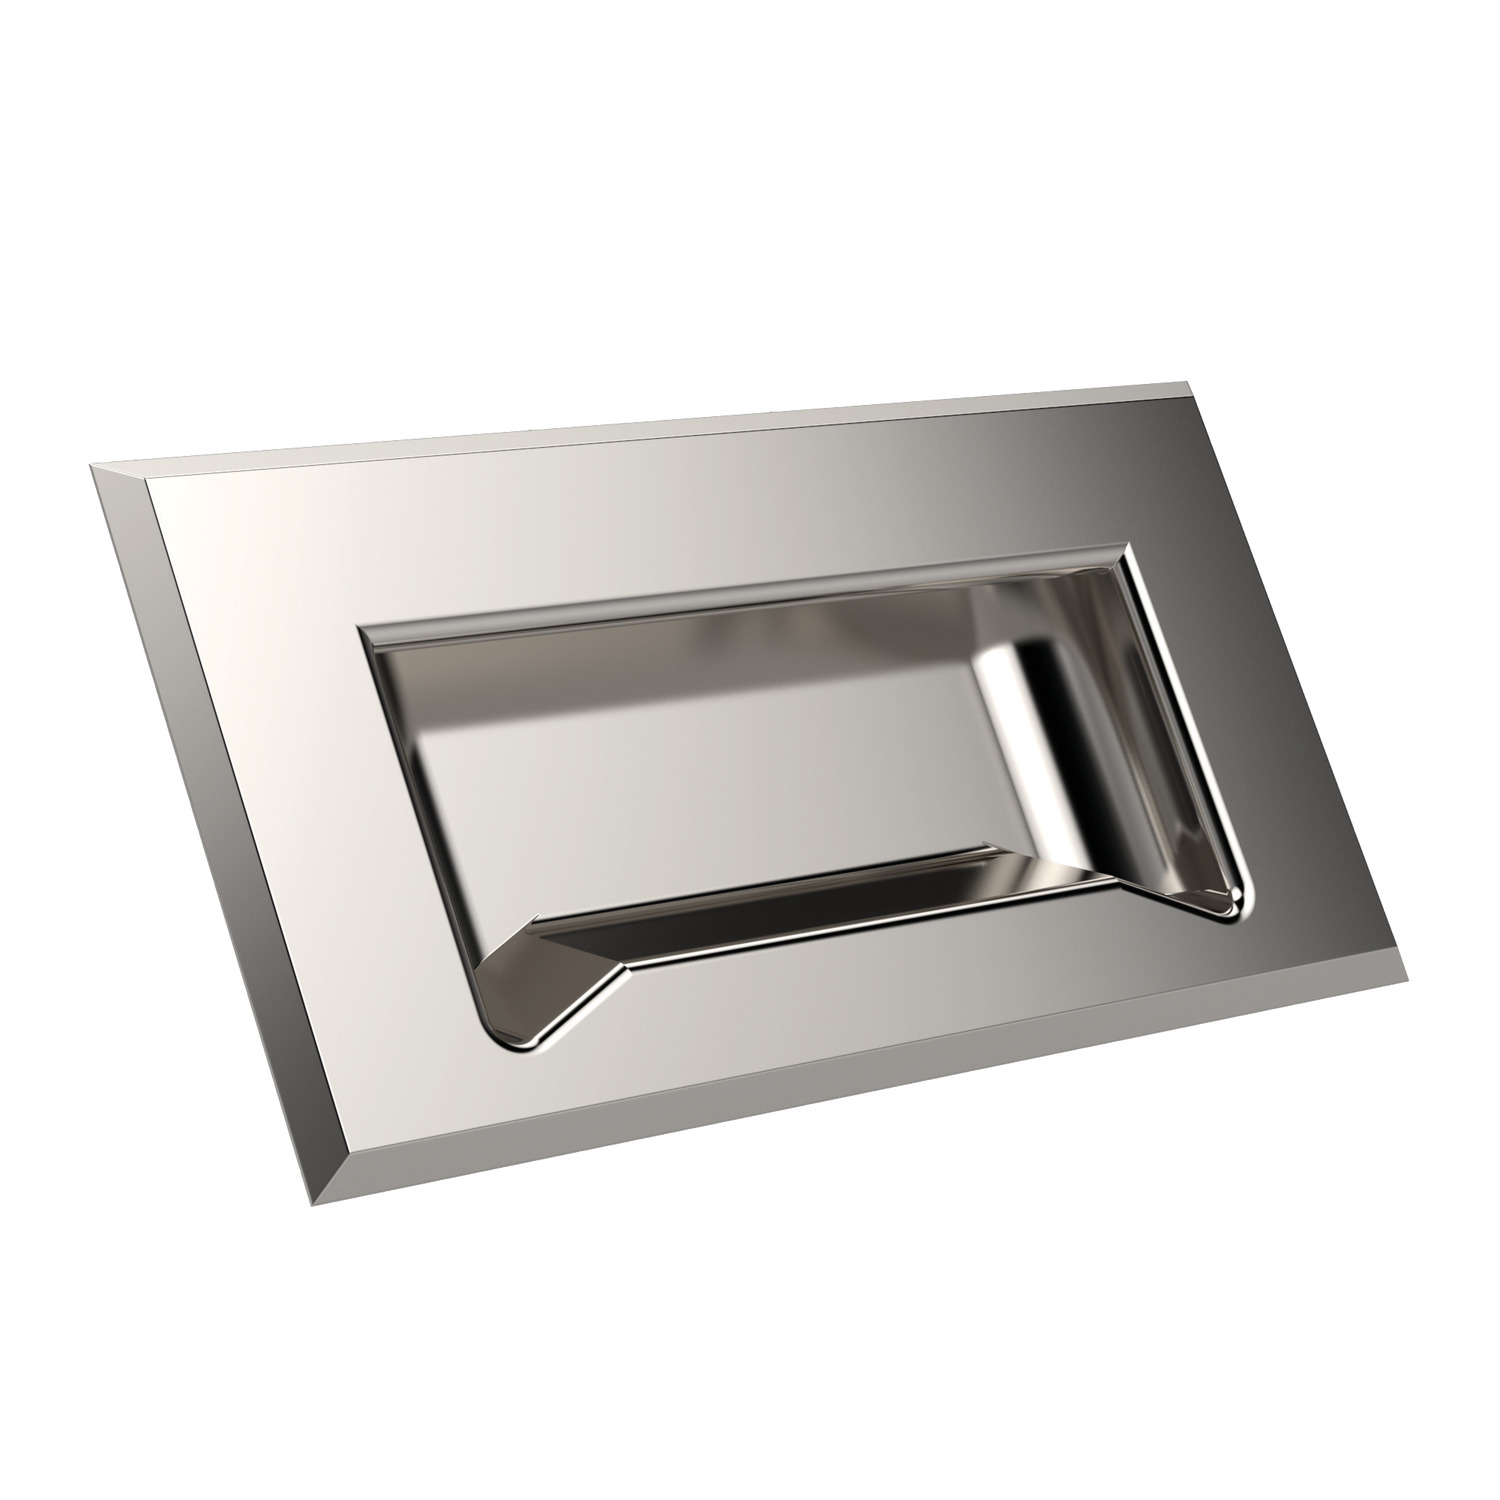 Product 79490, Recessed Pull Handles stainless steel / 